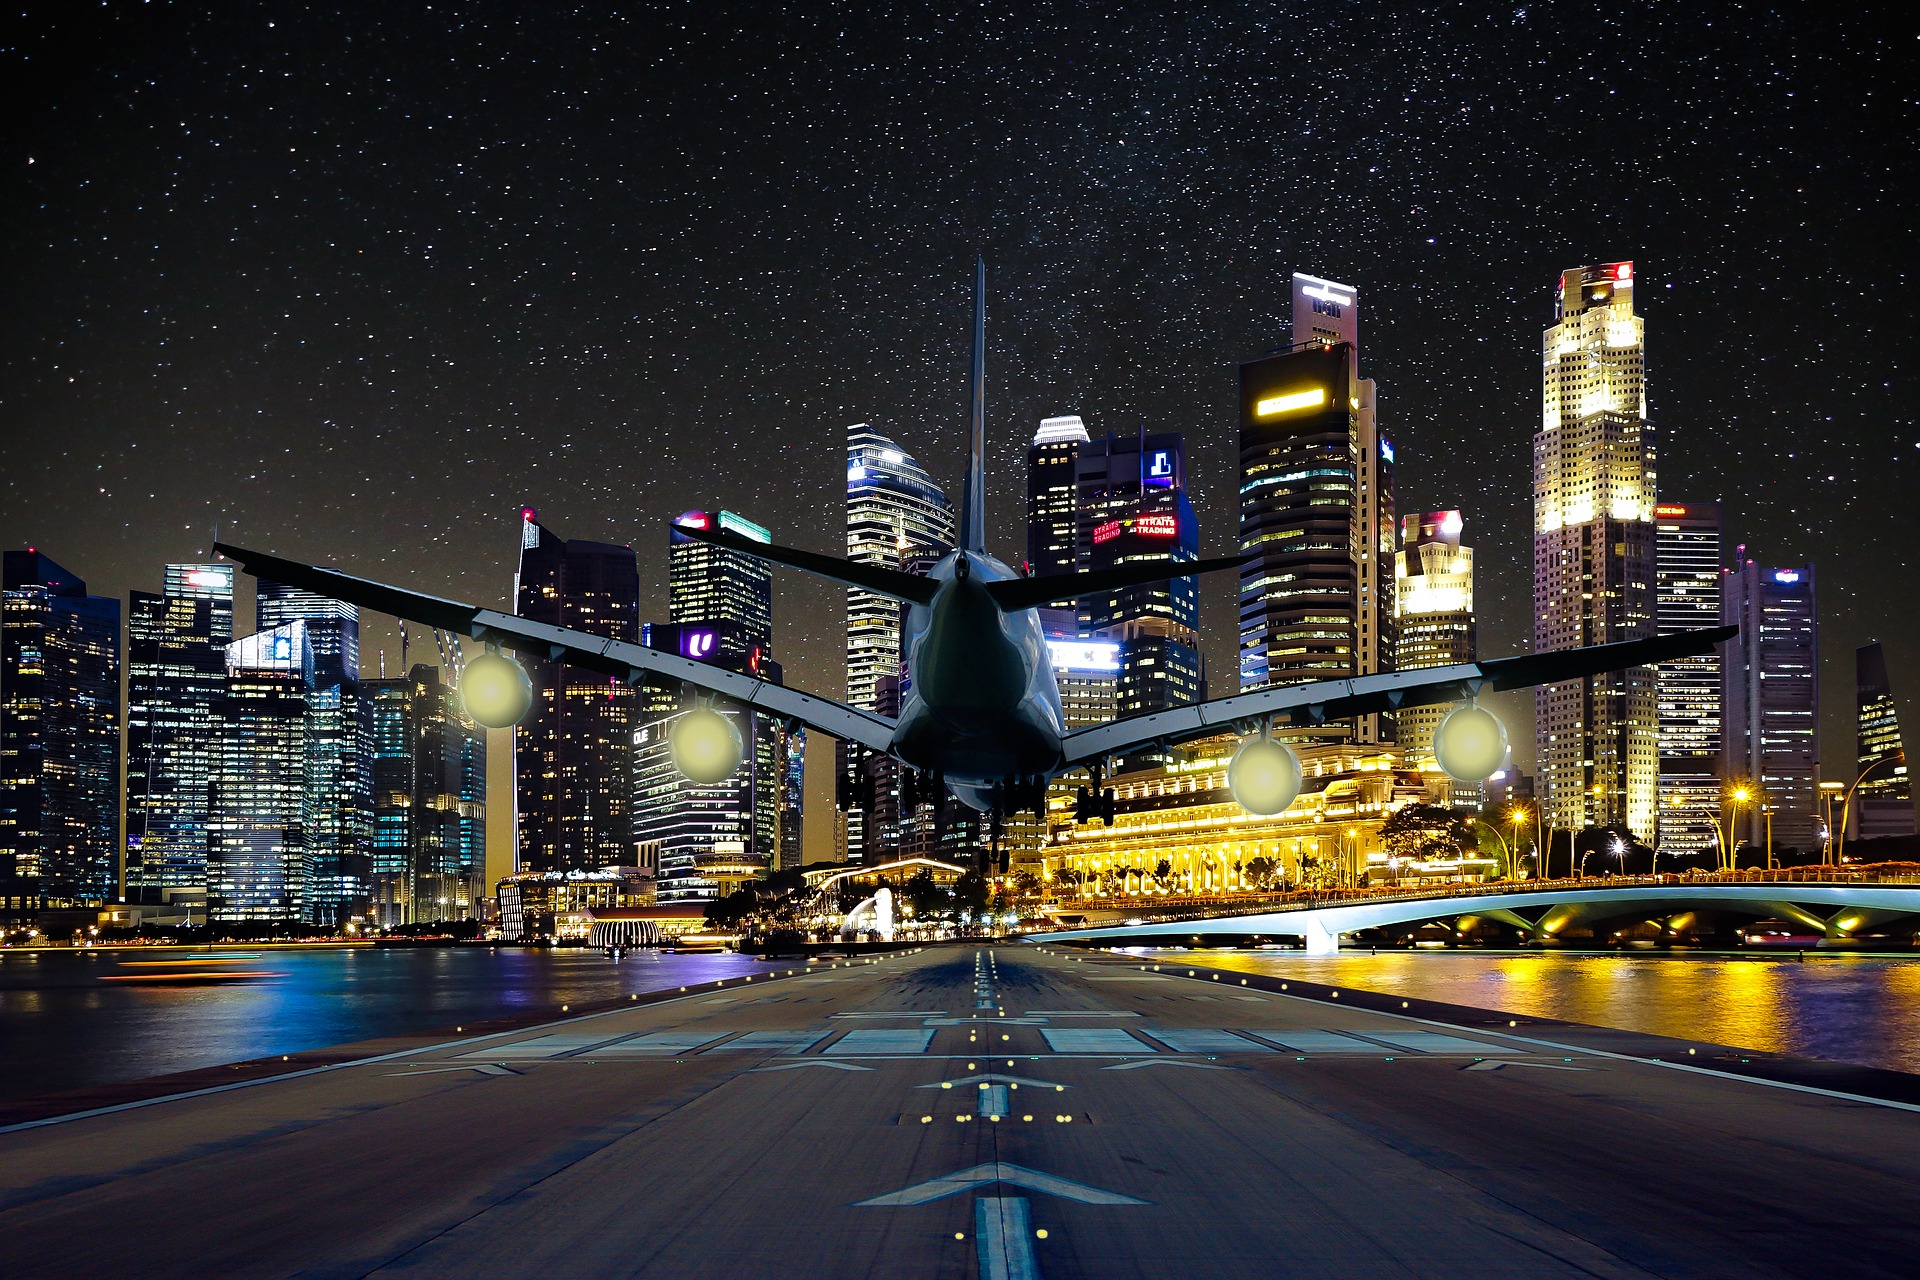 Image of an airplane with a city backdrop